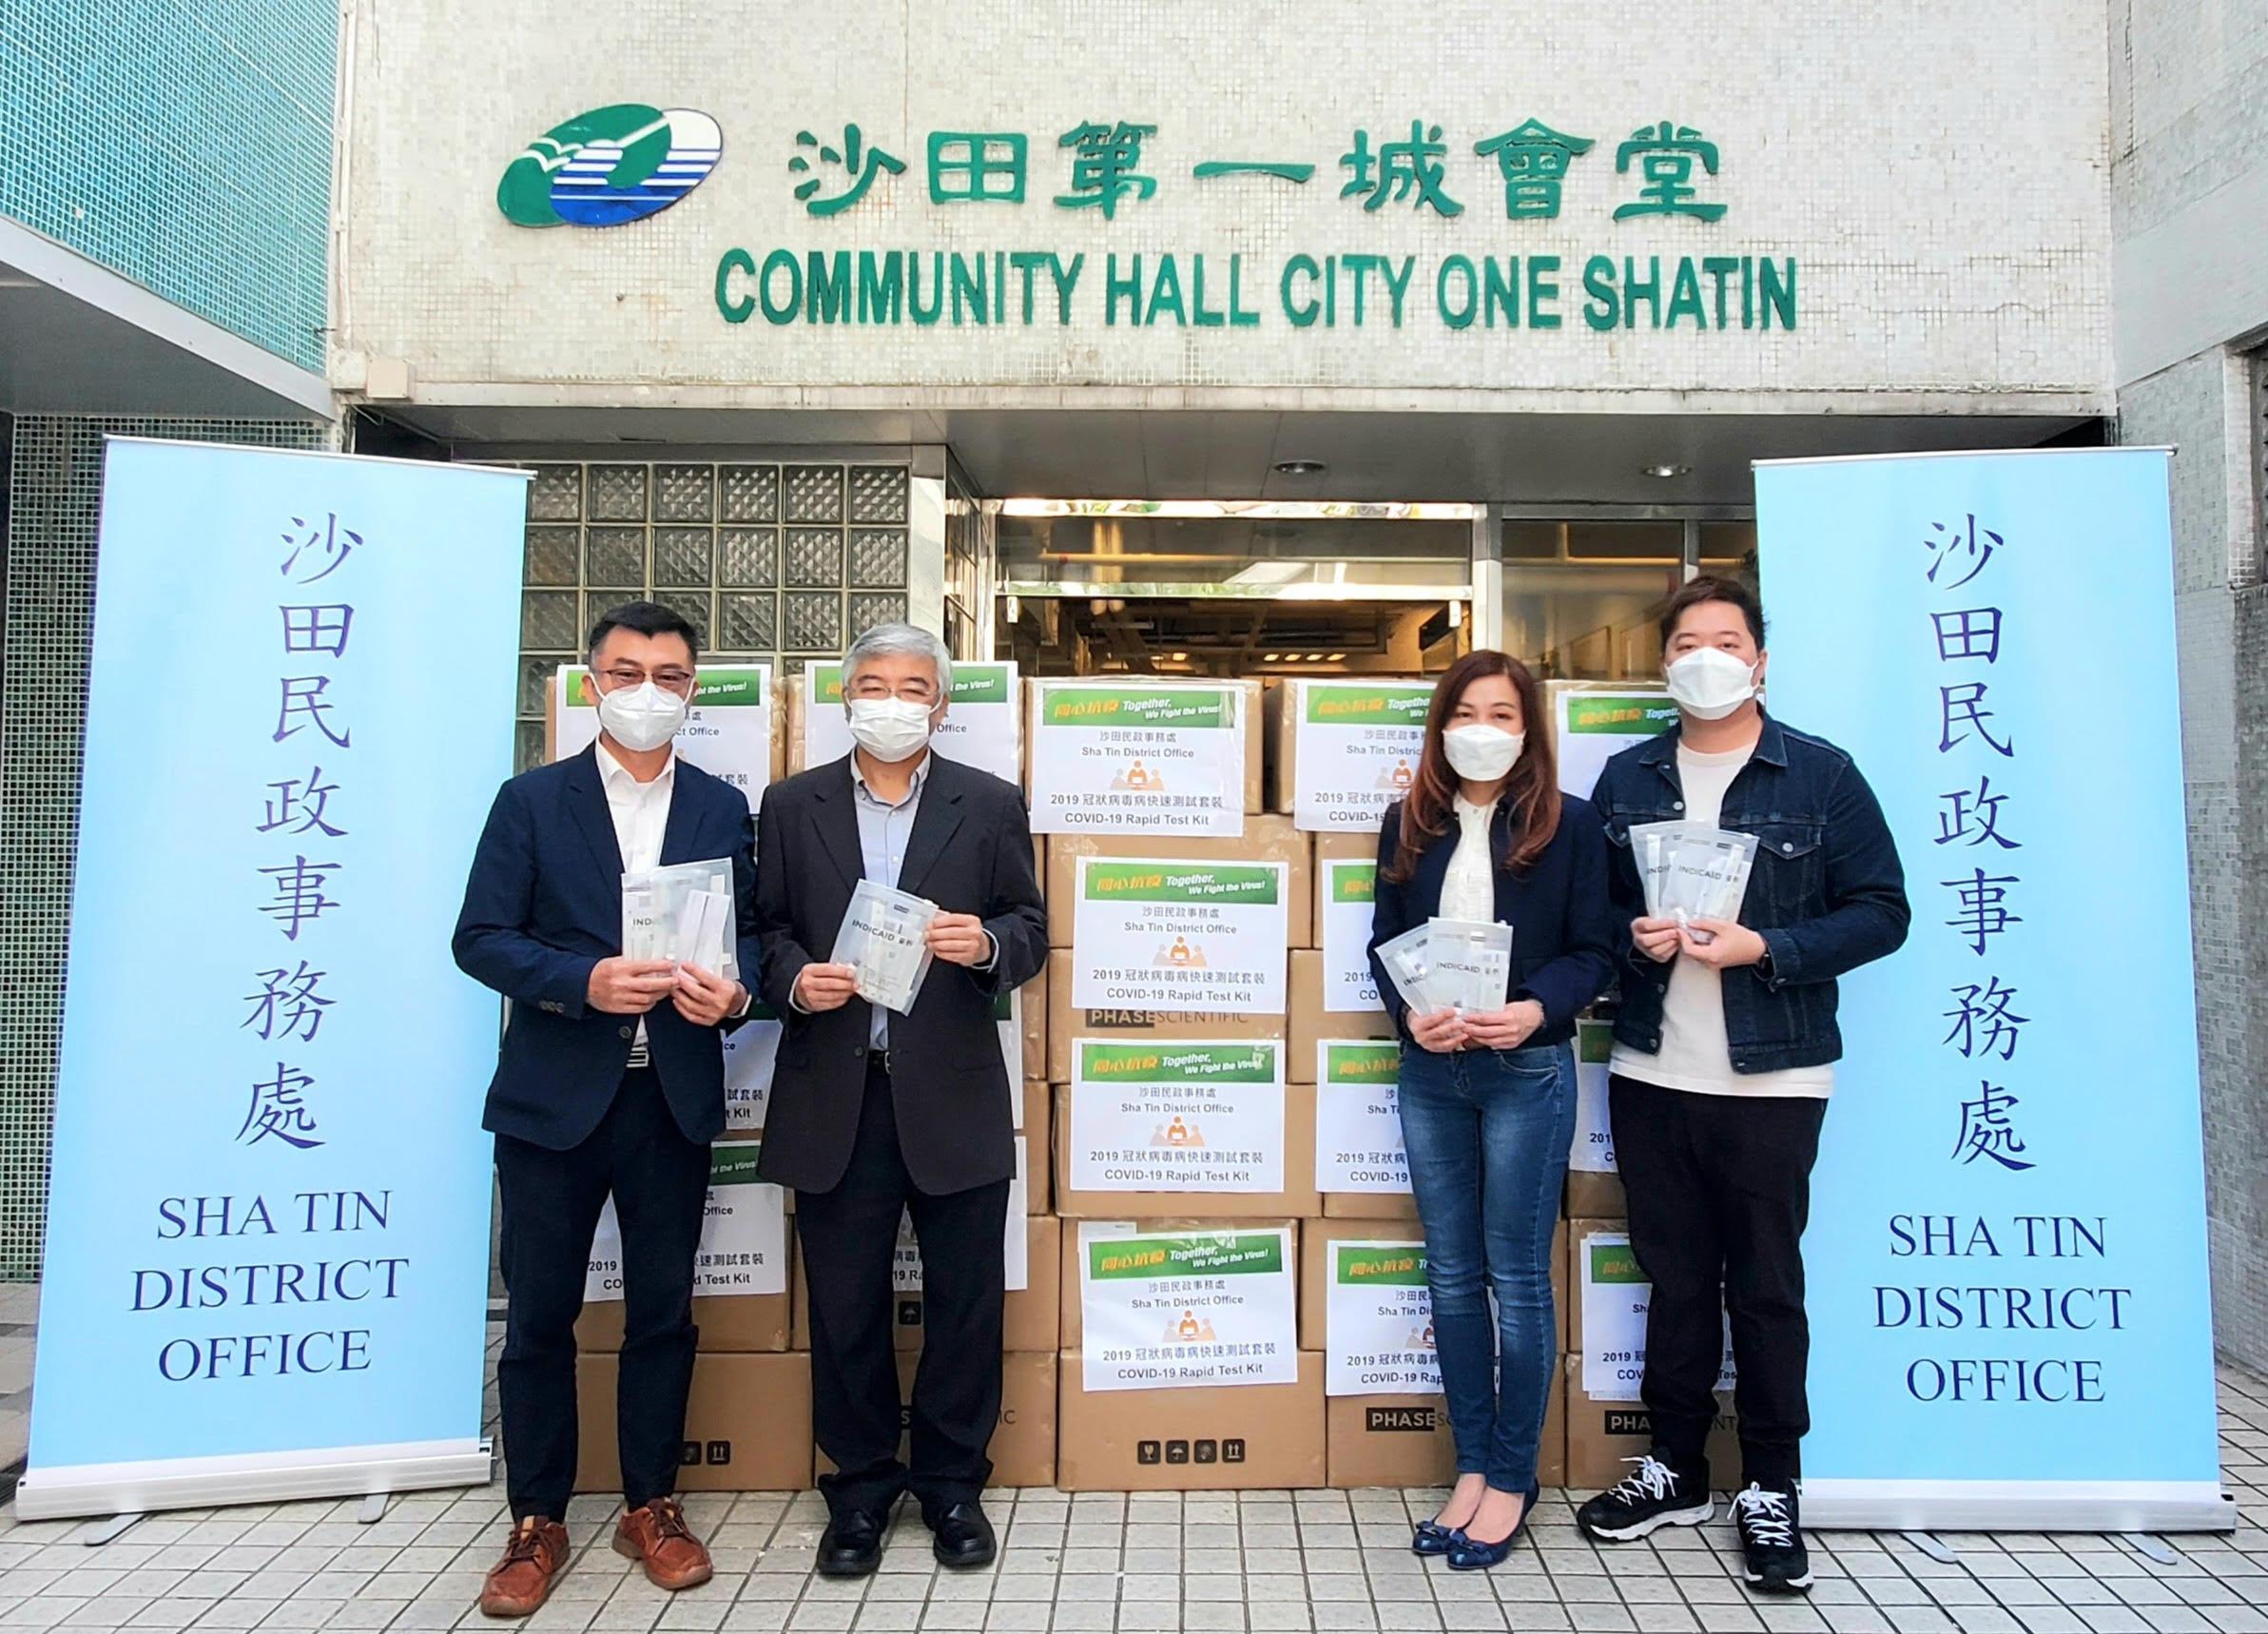 The Sha Tin District Office today (March 10) distributed COVID-19 rapid test kits to households, cleansing workers and property management staff living and working in City One Shatin for voluntary testing through the property management company.